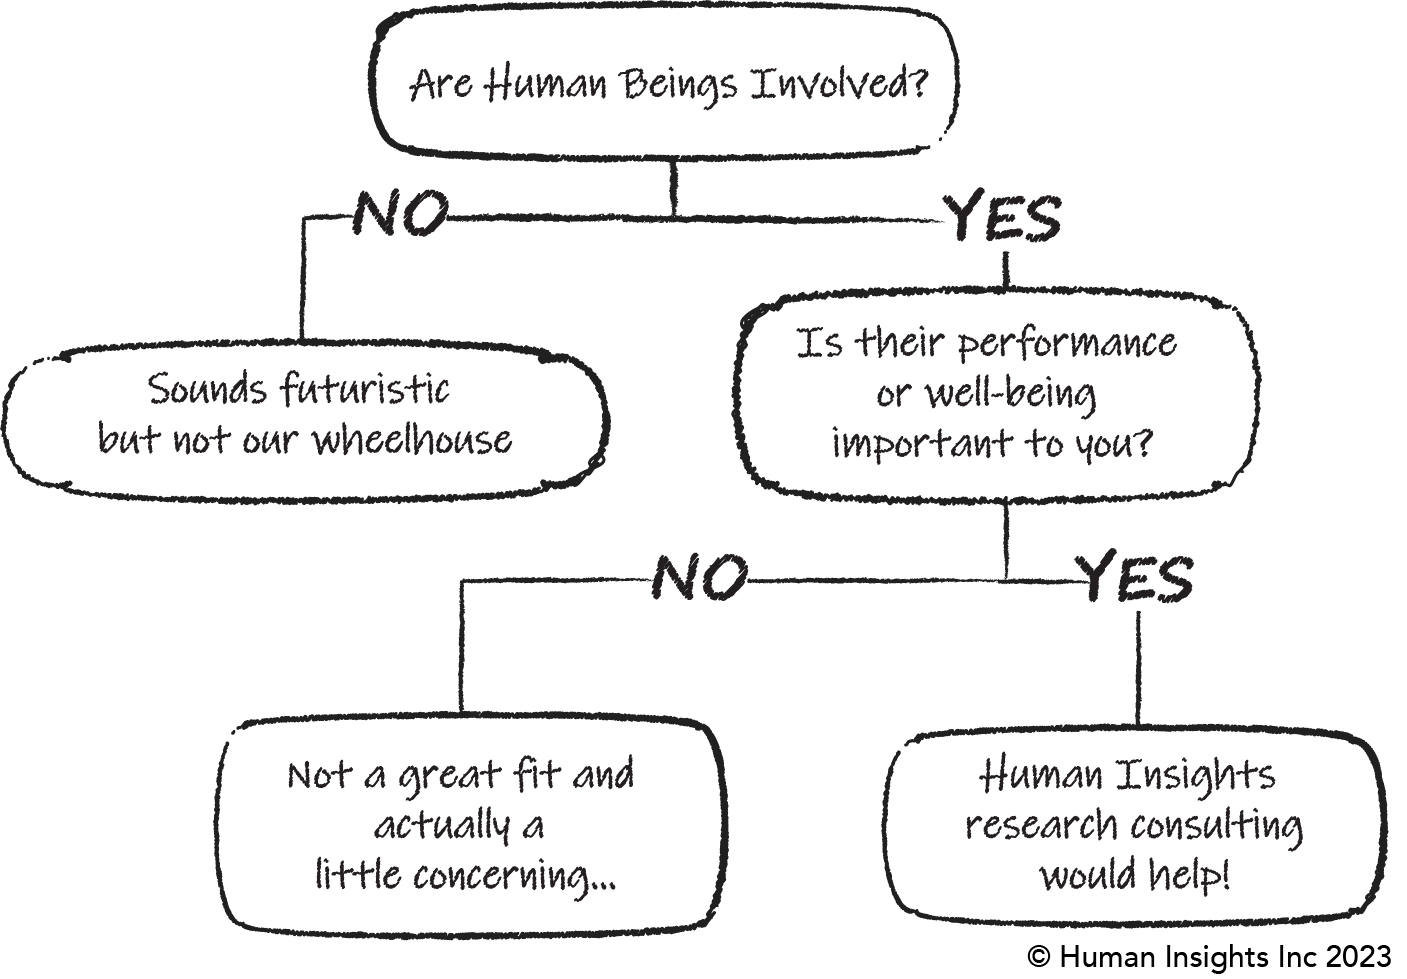 Human Insights consulting flowchart